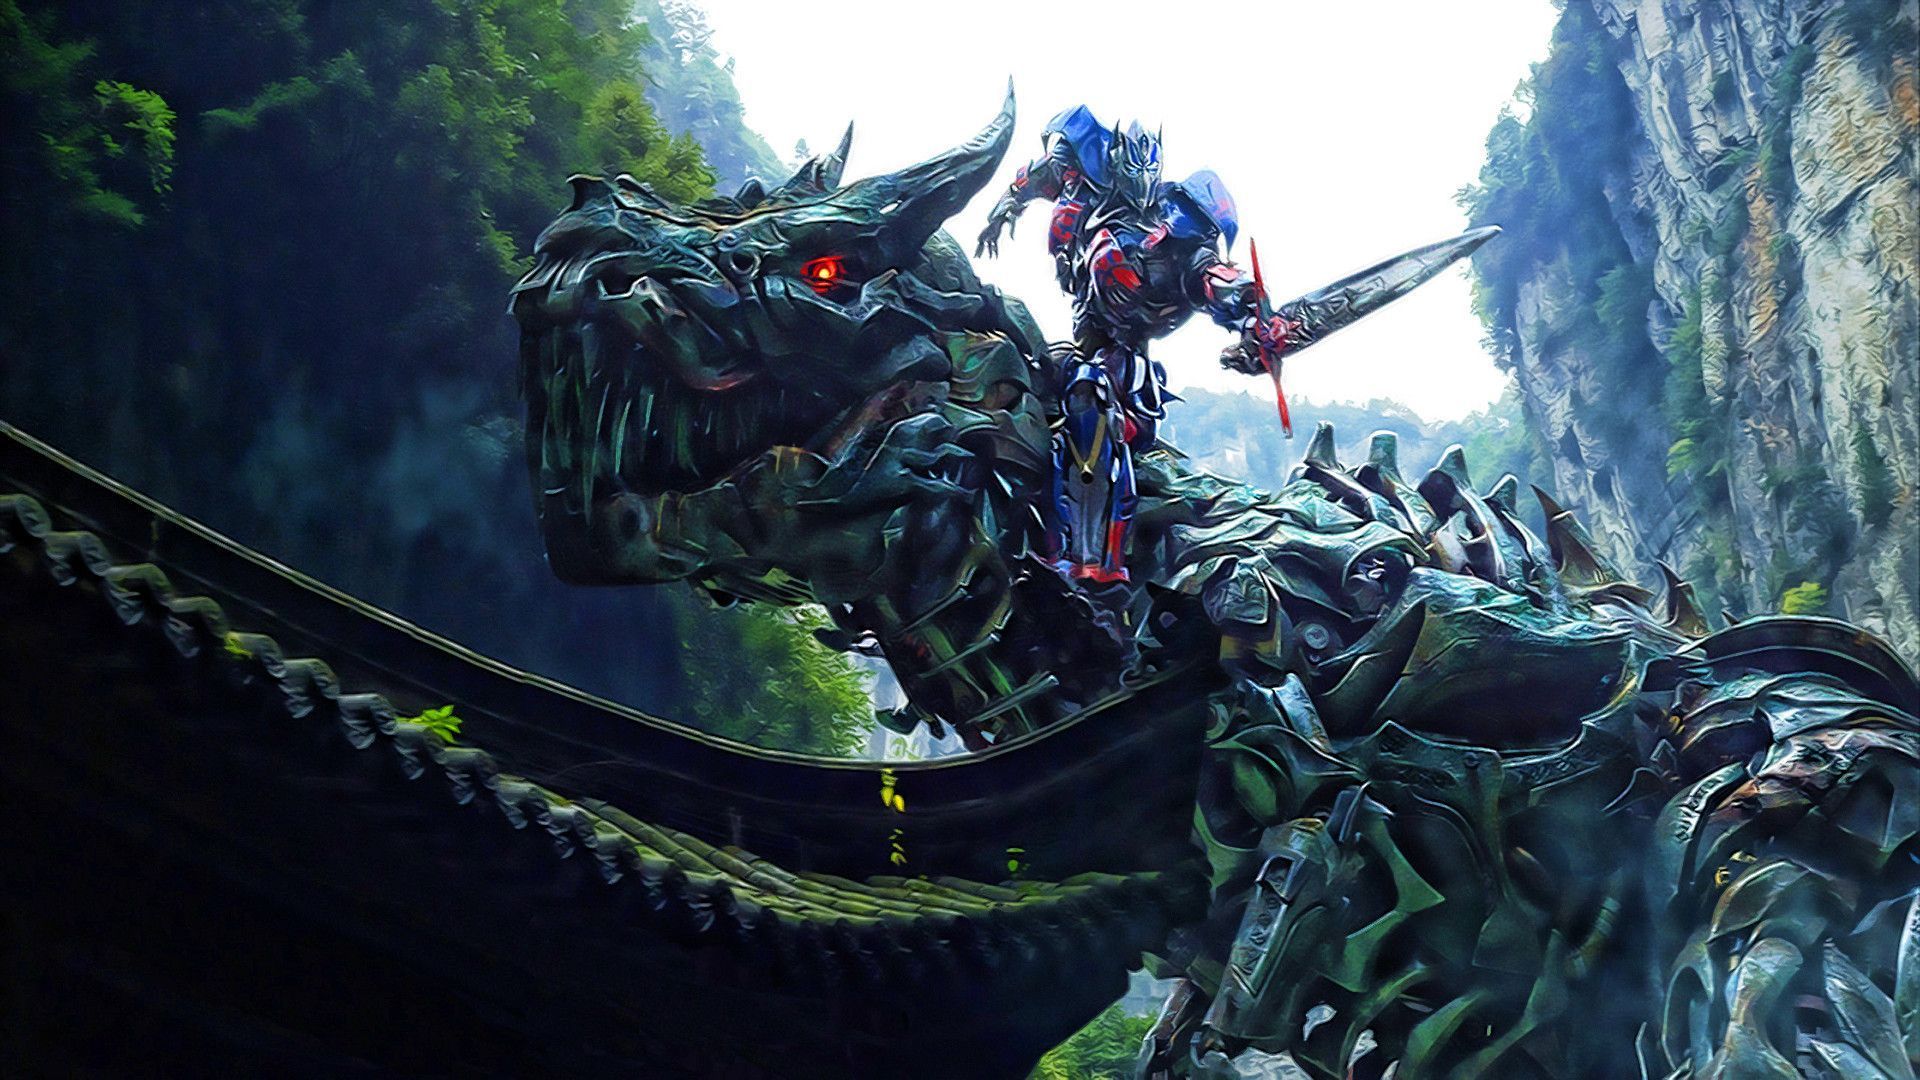 20 Breathtaking HD Wallpapers of Transformers Age of Extinction